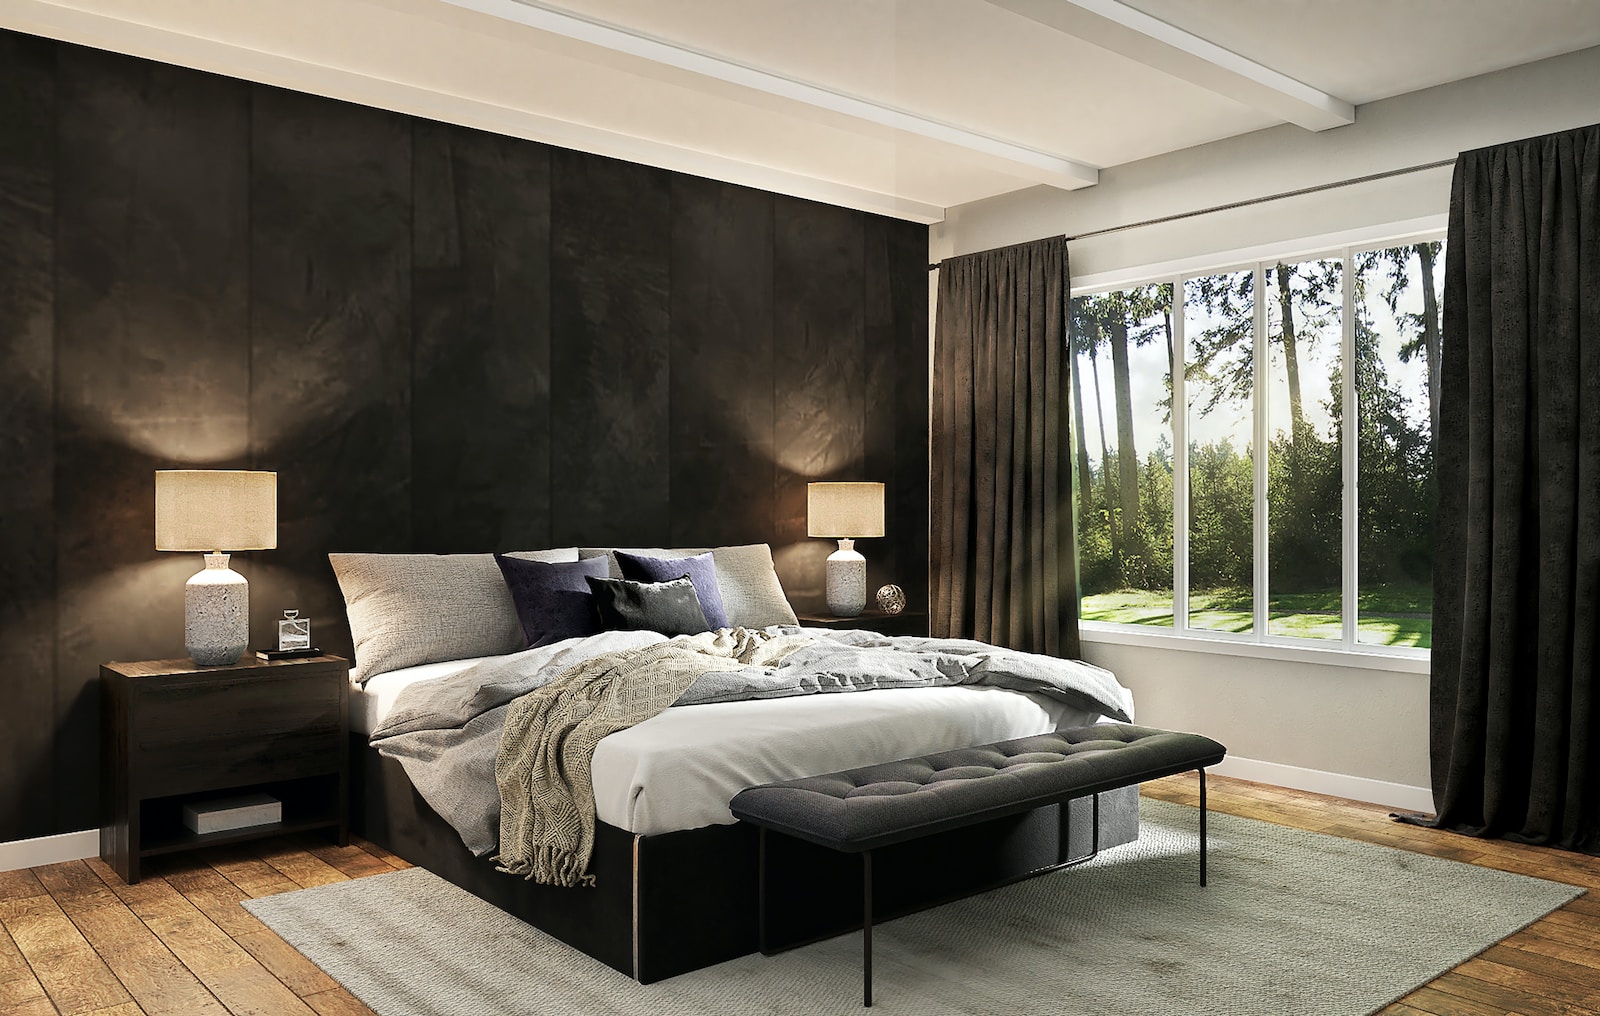 black and white bed linen